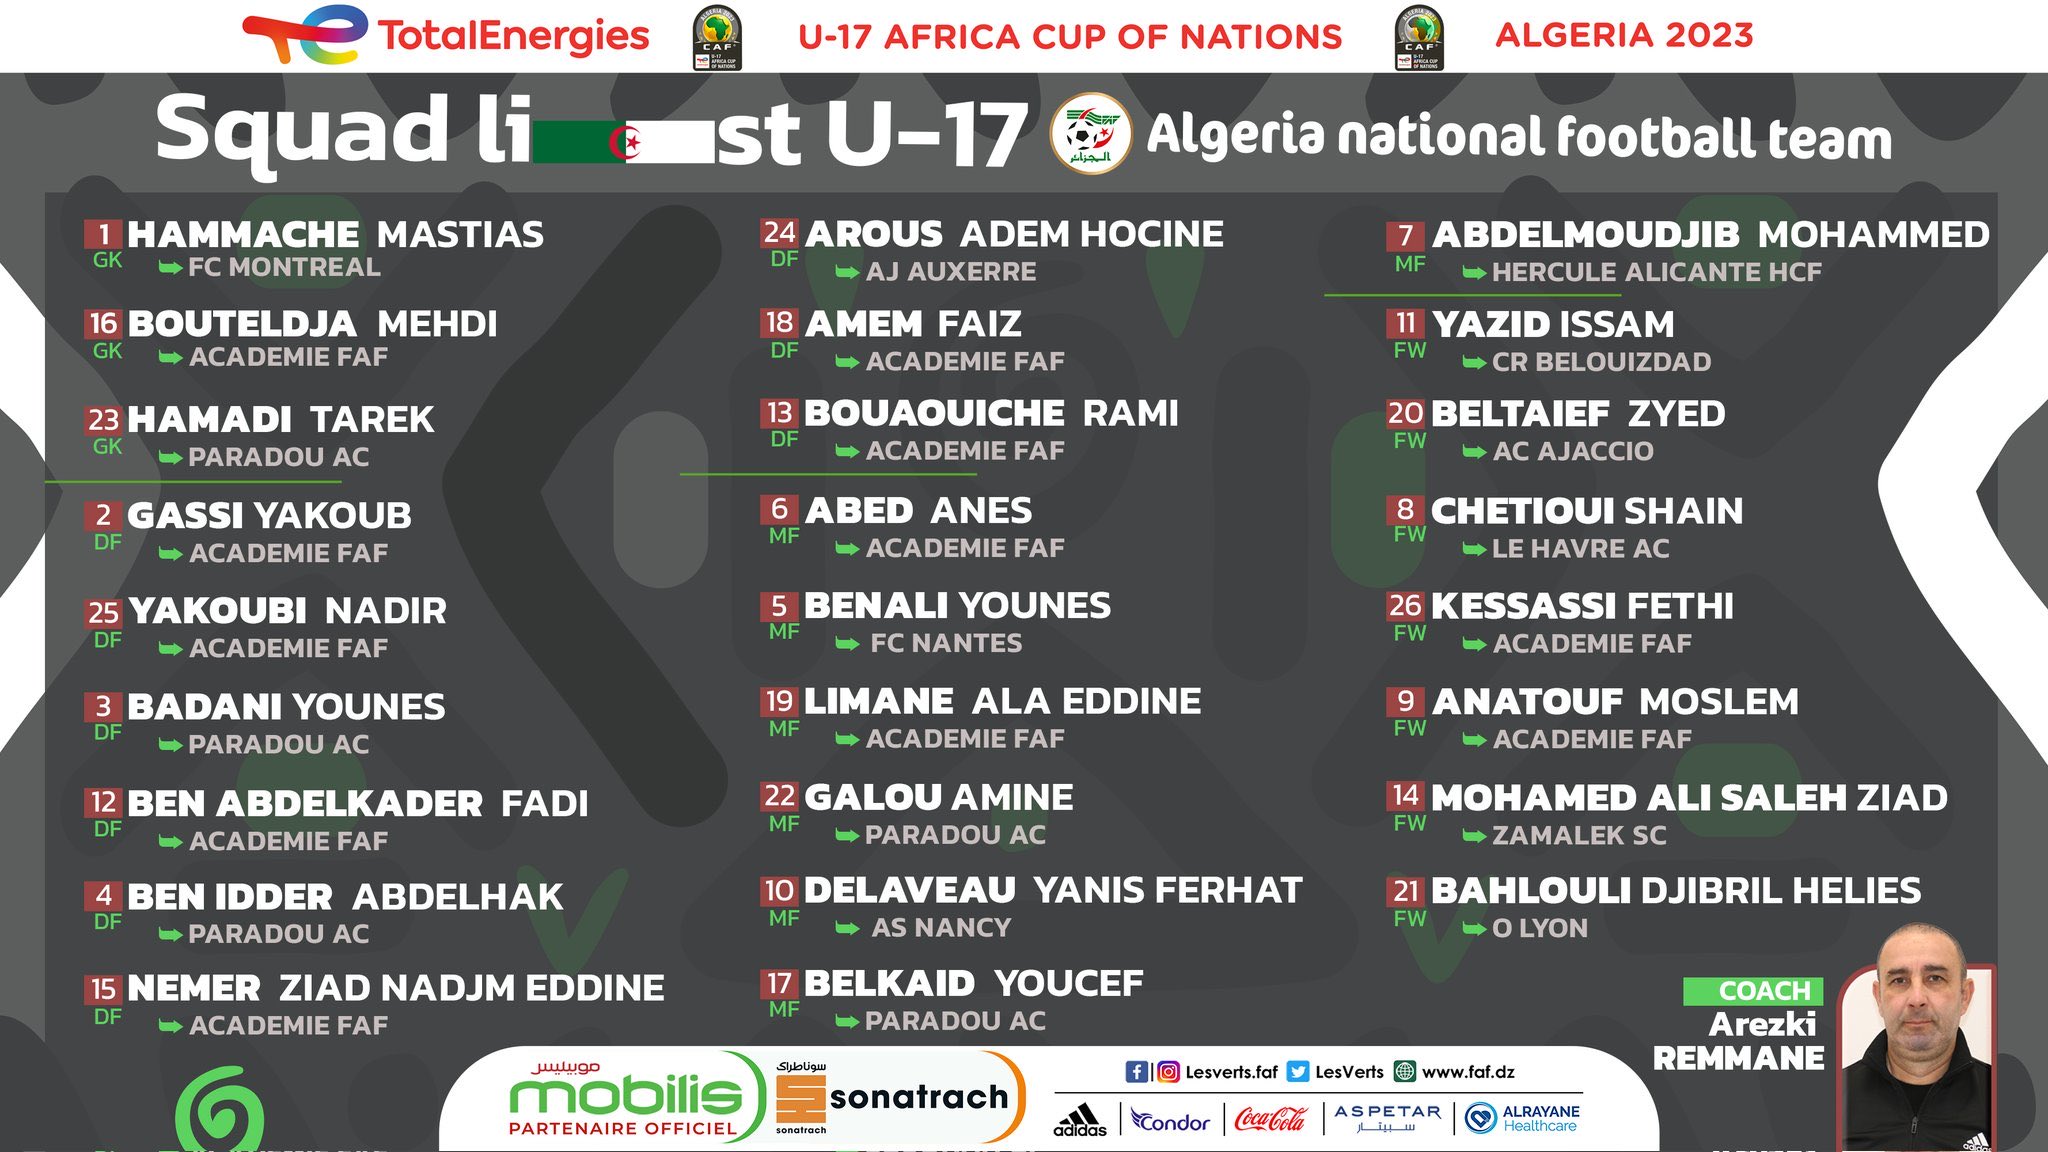 Algeria announces squad for the 2023 U17 Africa Cup of Nations